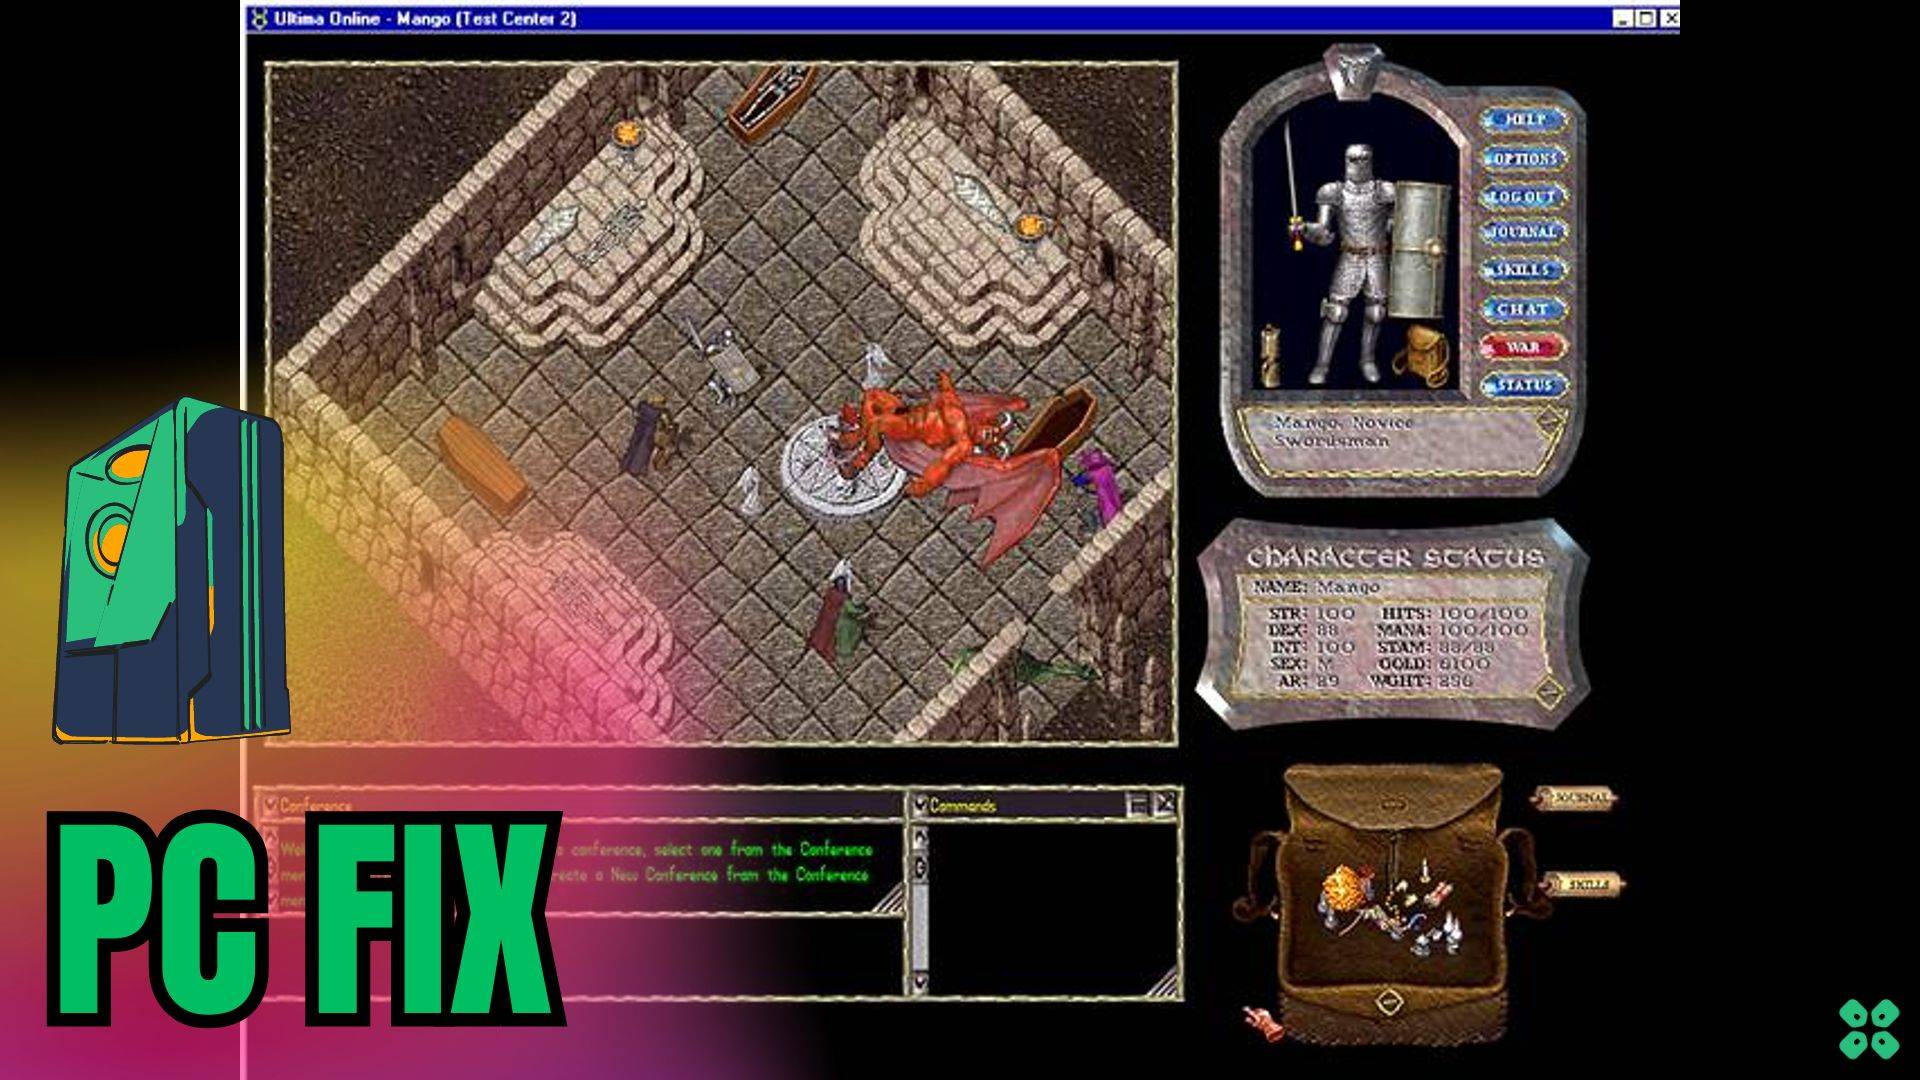 Artwork of Ultima Online and its fix of lagging by TCG